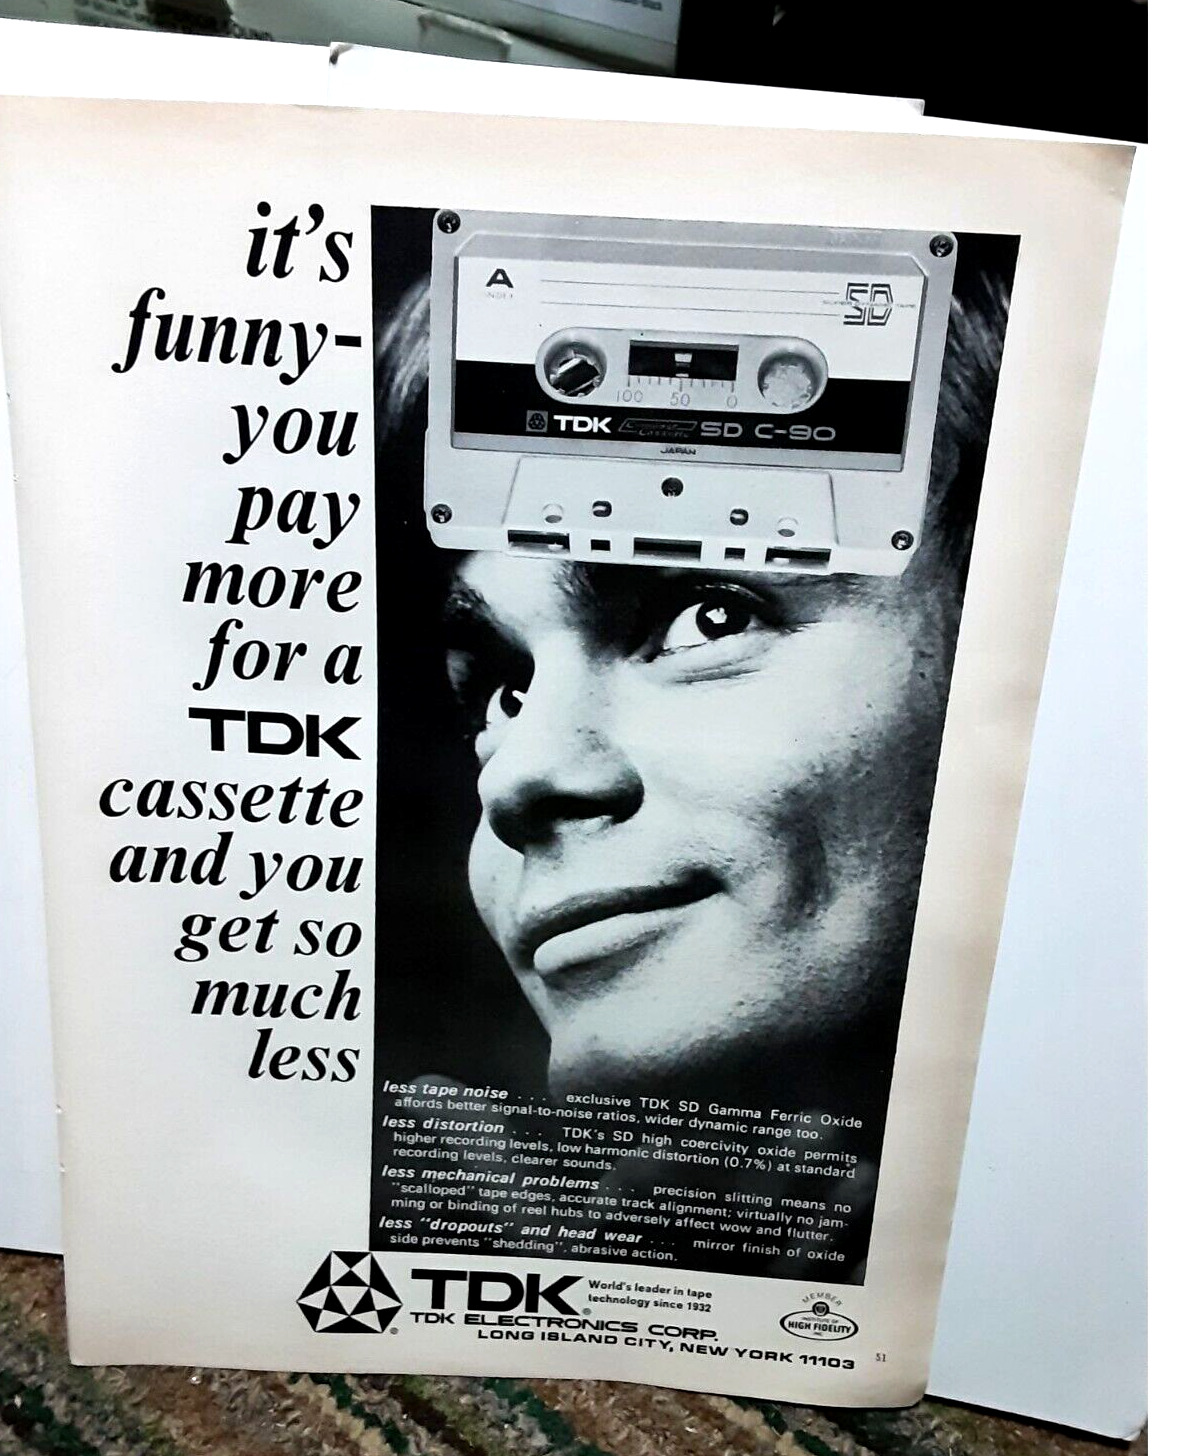 1971 TDK Cassette Get So Much Less Vintage Print Ad 70s